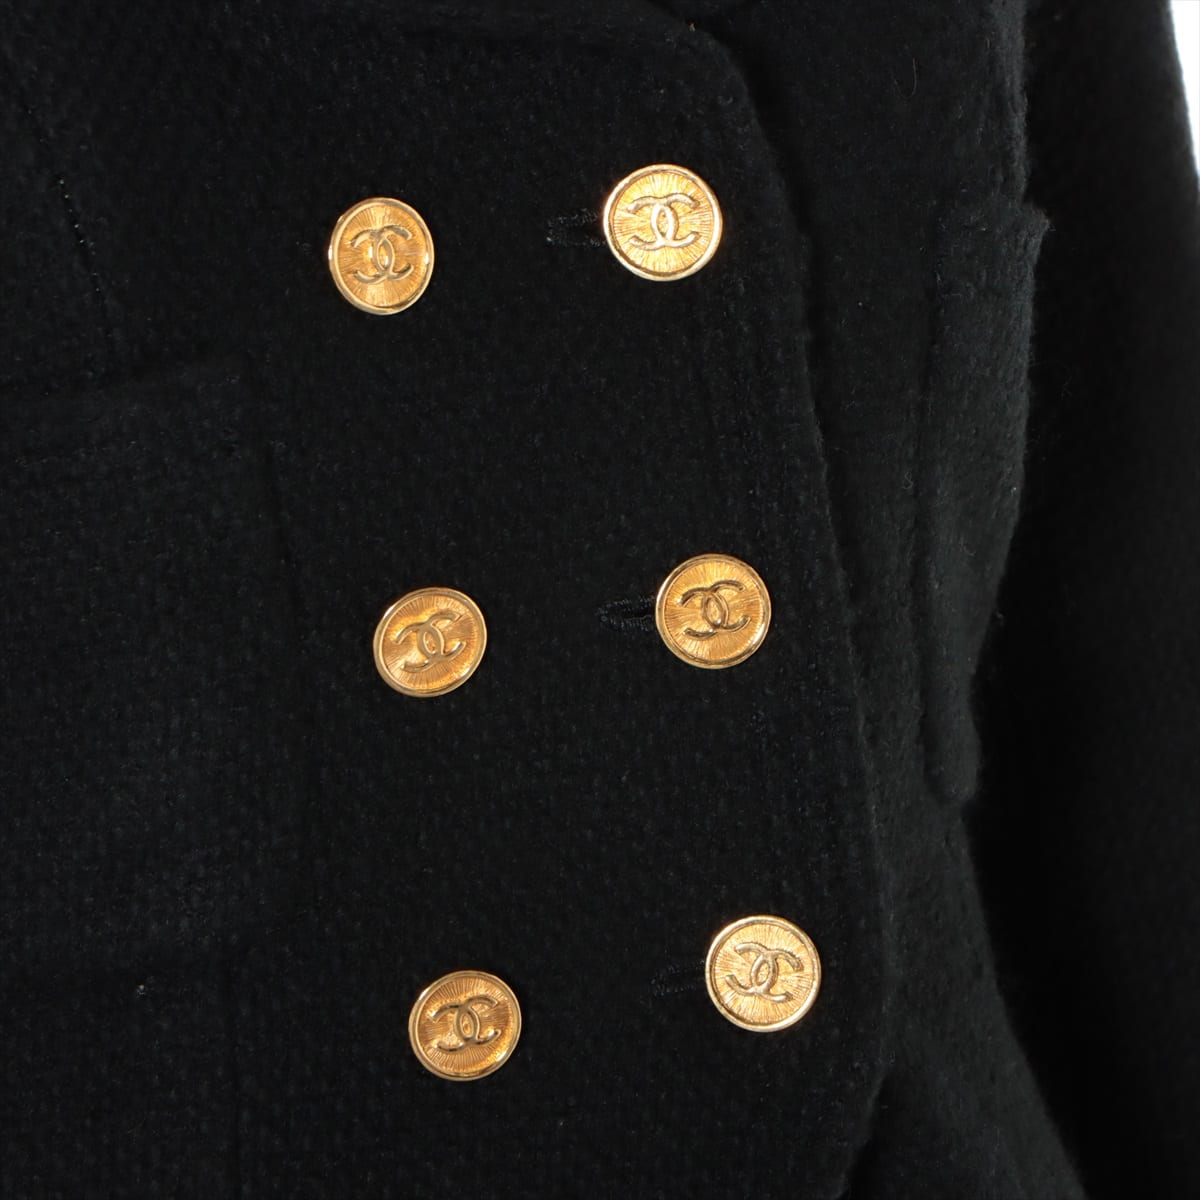 Chanel Coco Mark Unknown material Setup Unknown size Ladies' Black No sign tag Gold button